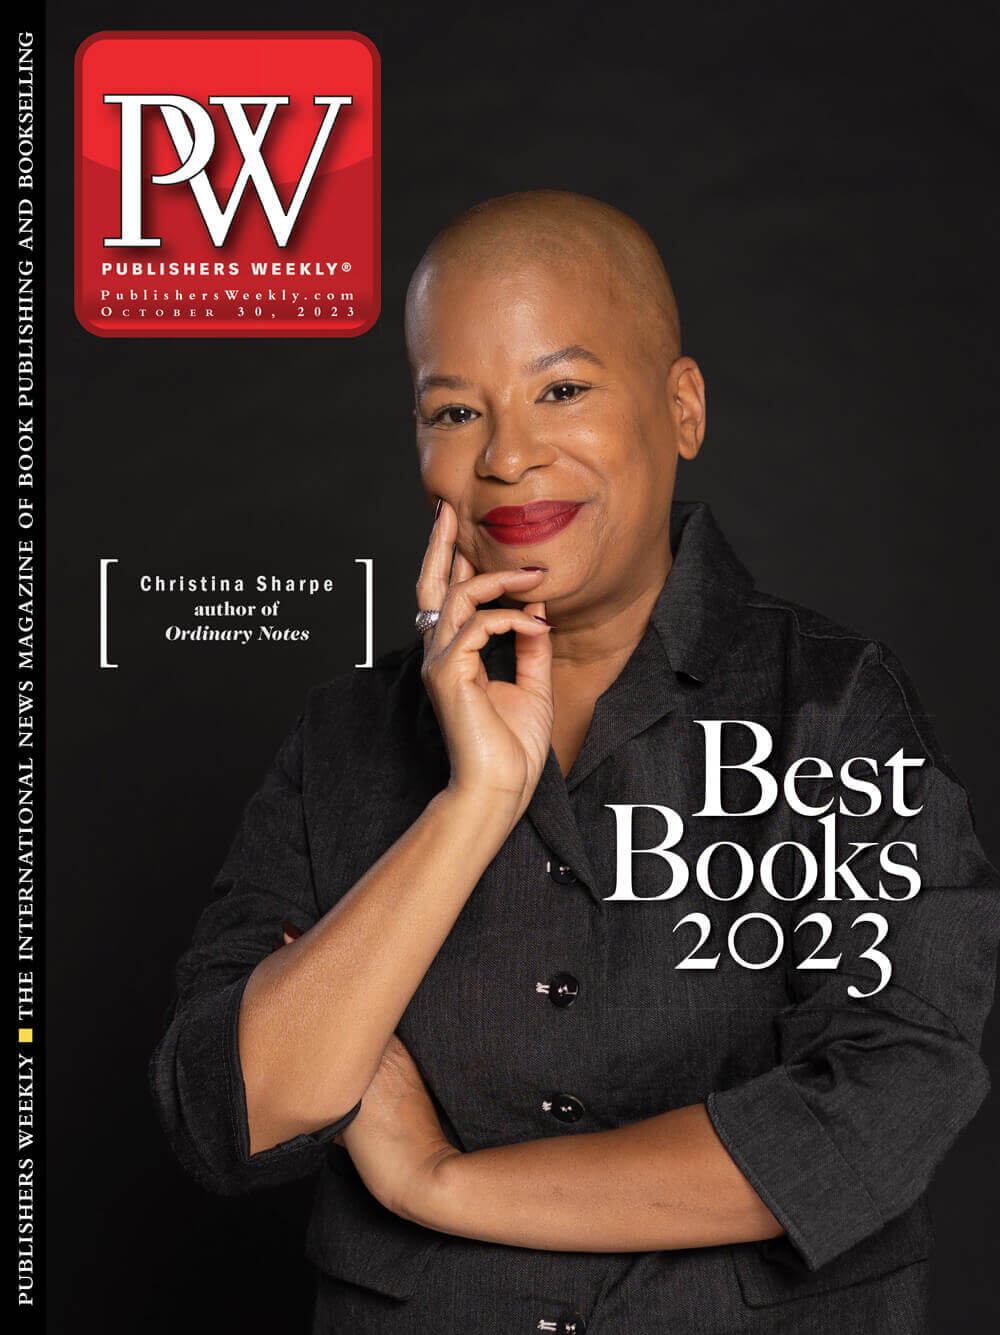 Publishers Weekly Has Announced Their List of Best Books 2023 Good e